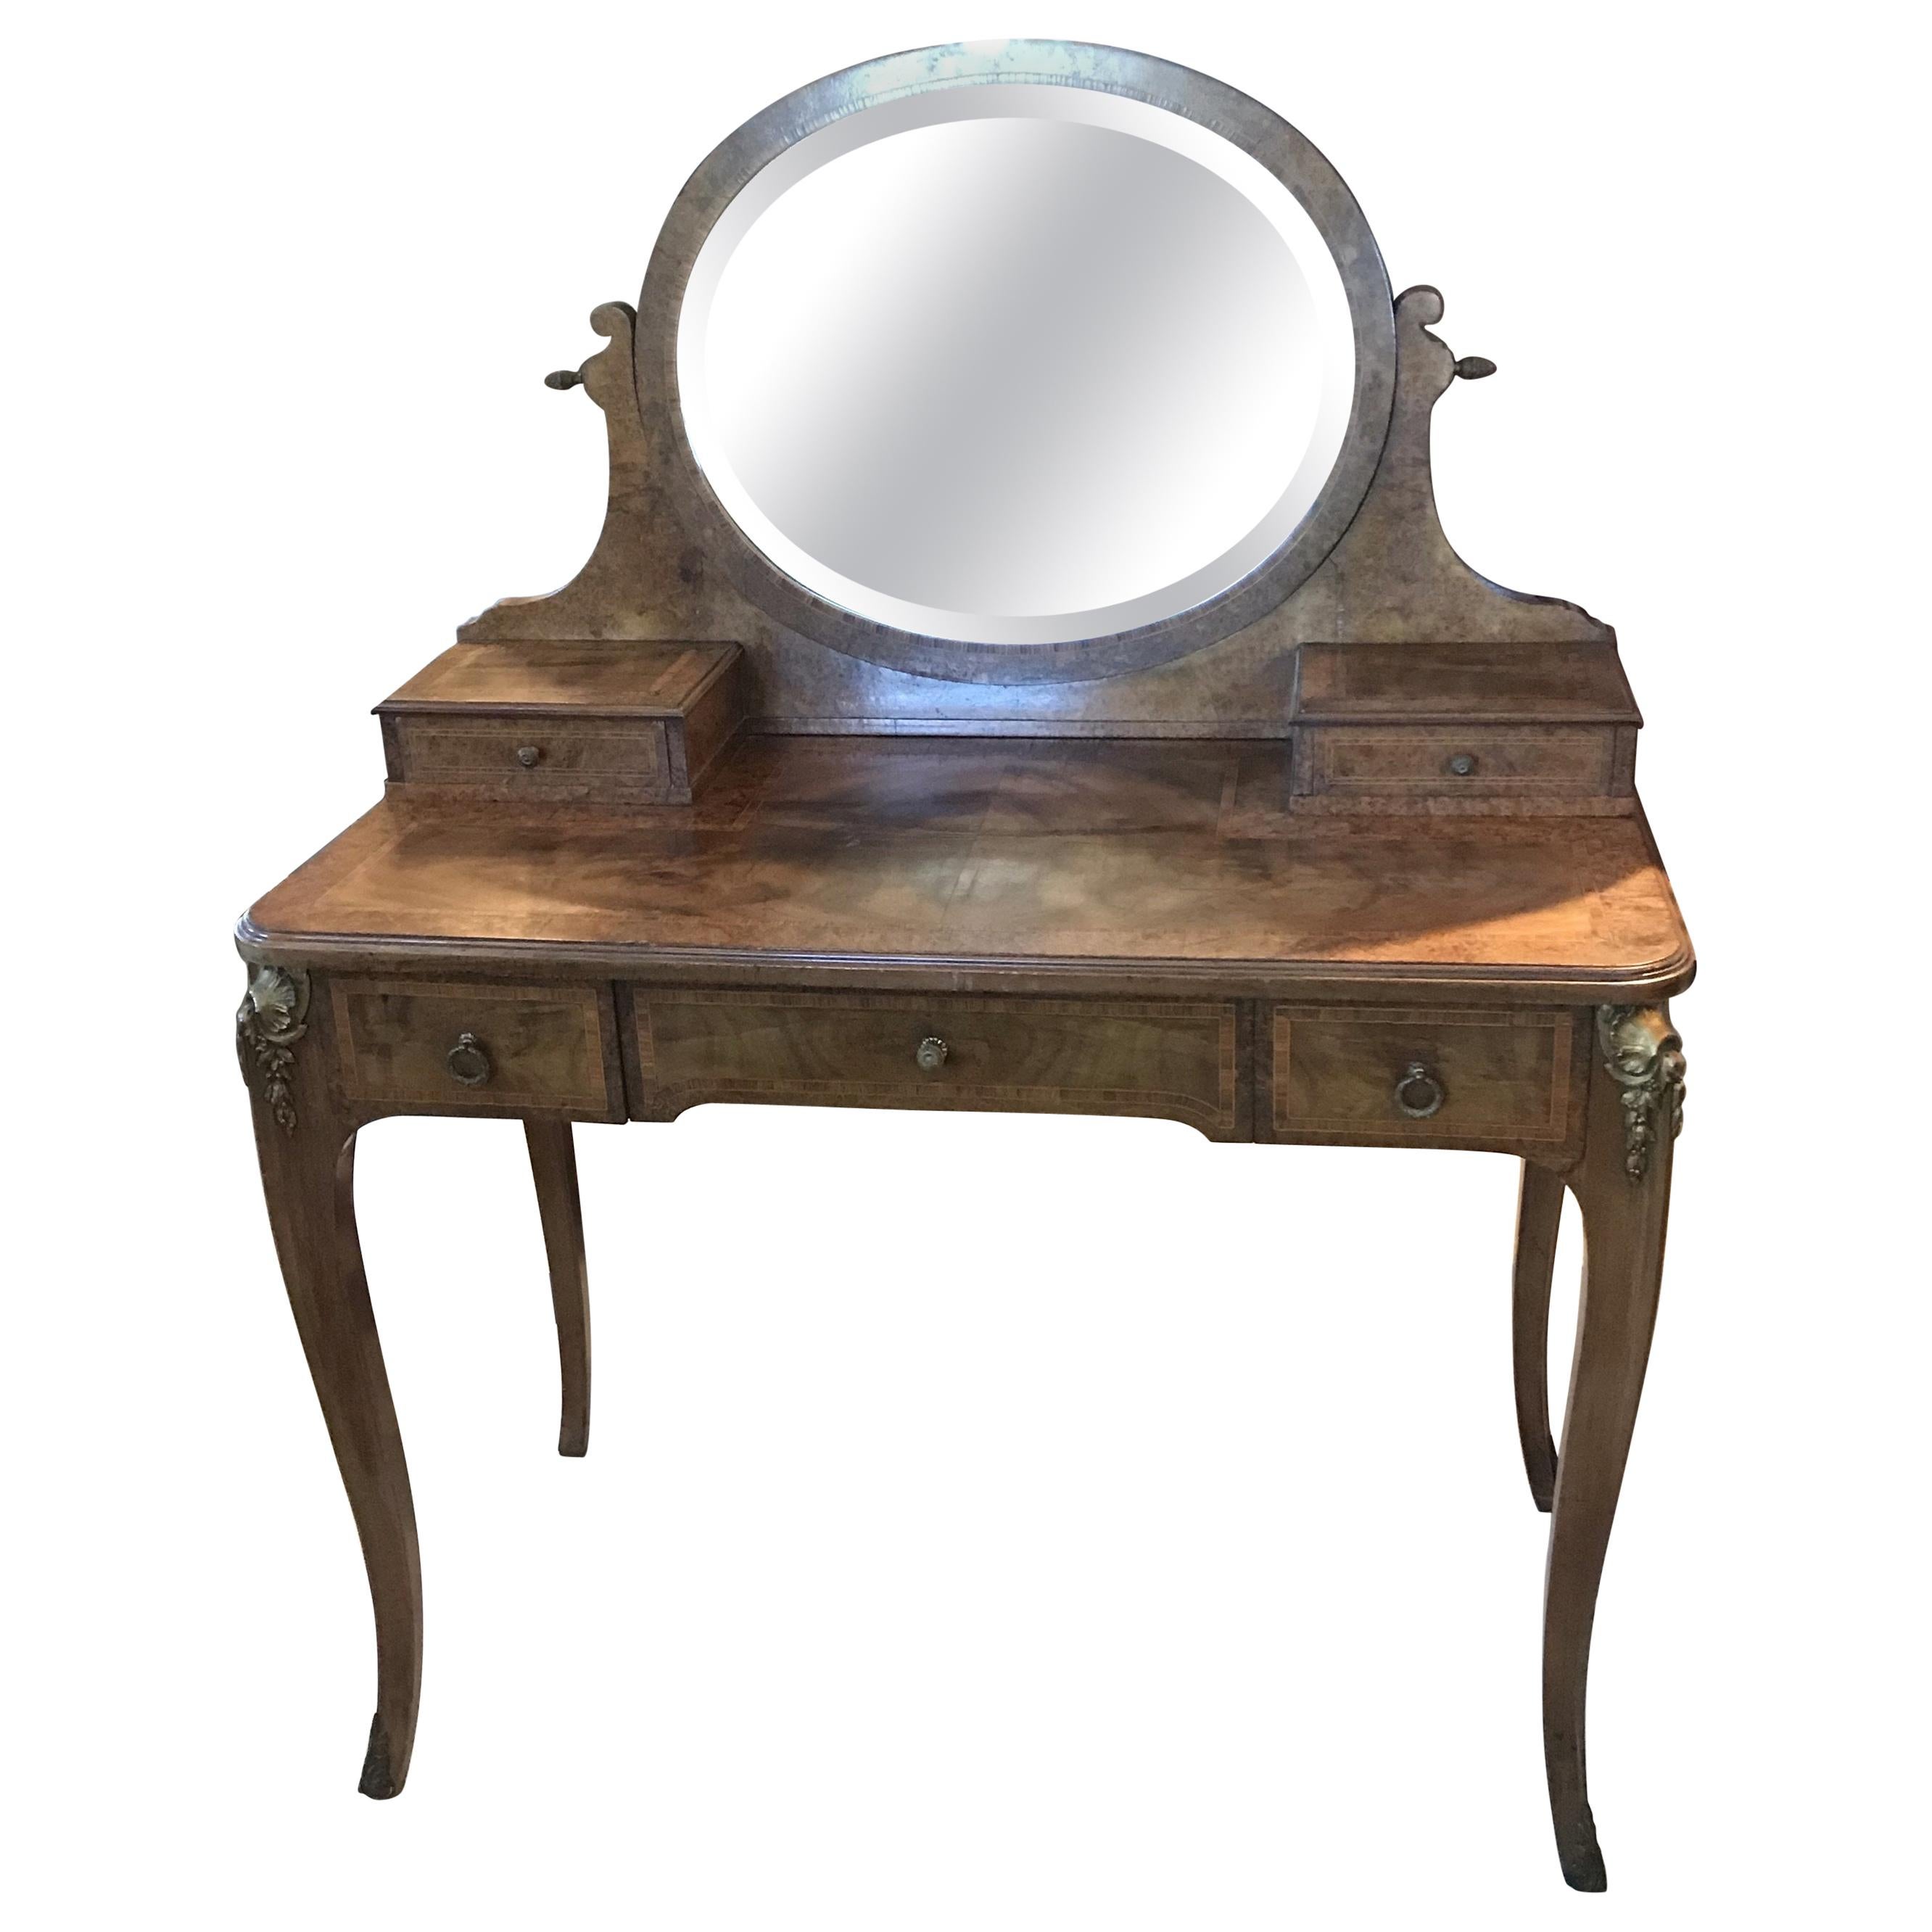 Antique French Inlaid and Burled Walnut Dressing Table Vanity